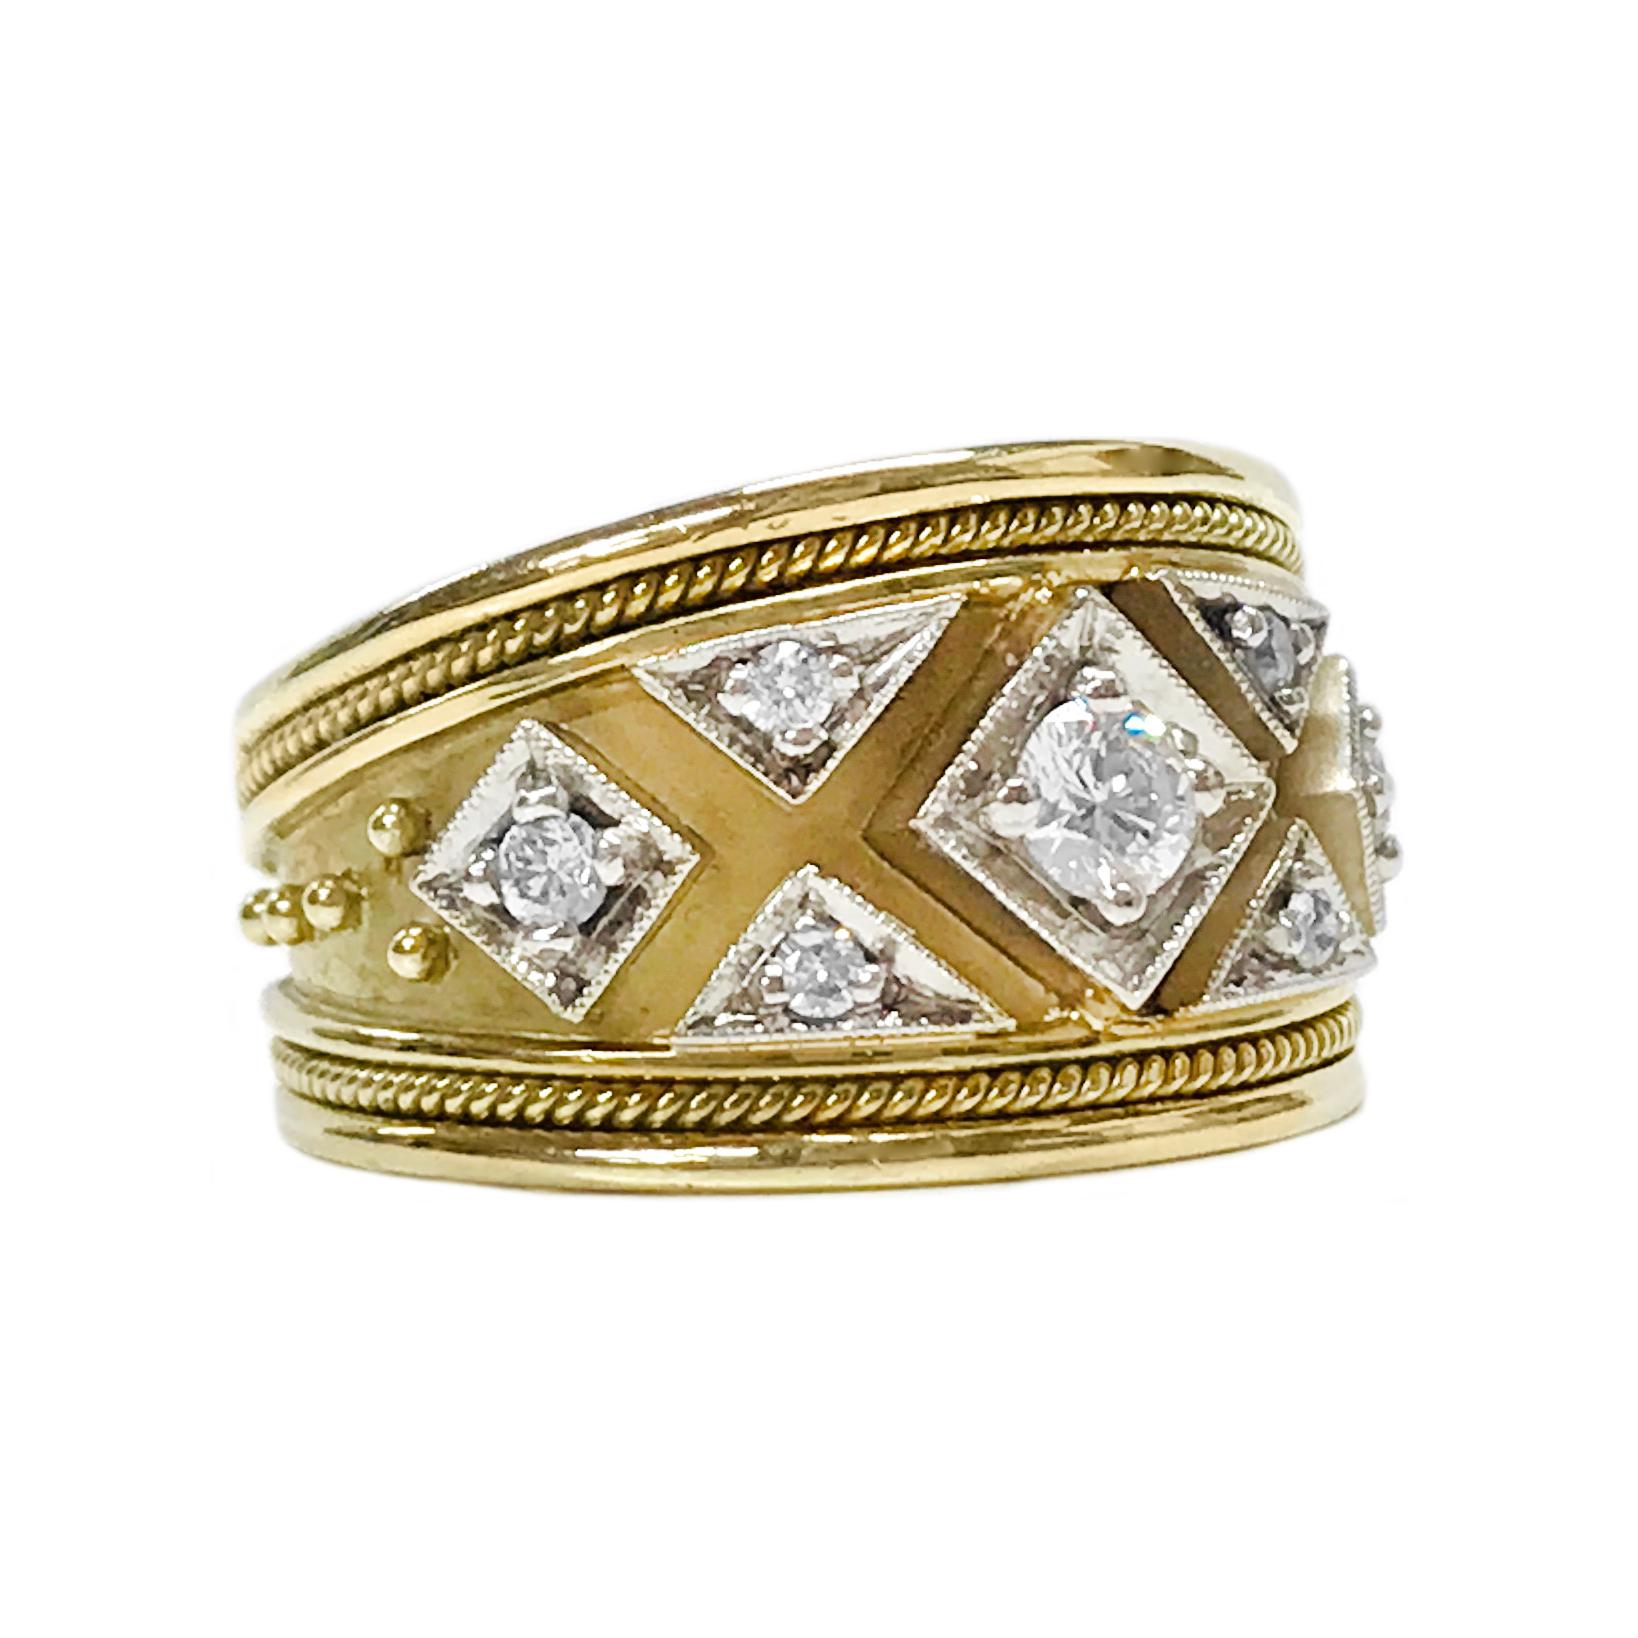 18 Karat diamond Etruscan-style band ring. The ring features seven round diamonds bead-set in white gold with milgrain detail. The ring has a rope detail on both the top and bottom, the ring also tapers. The 44mm center diamond has a total carat